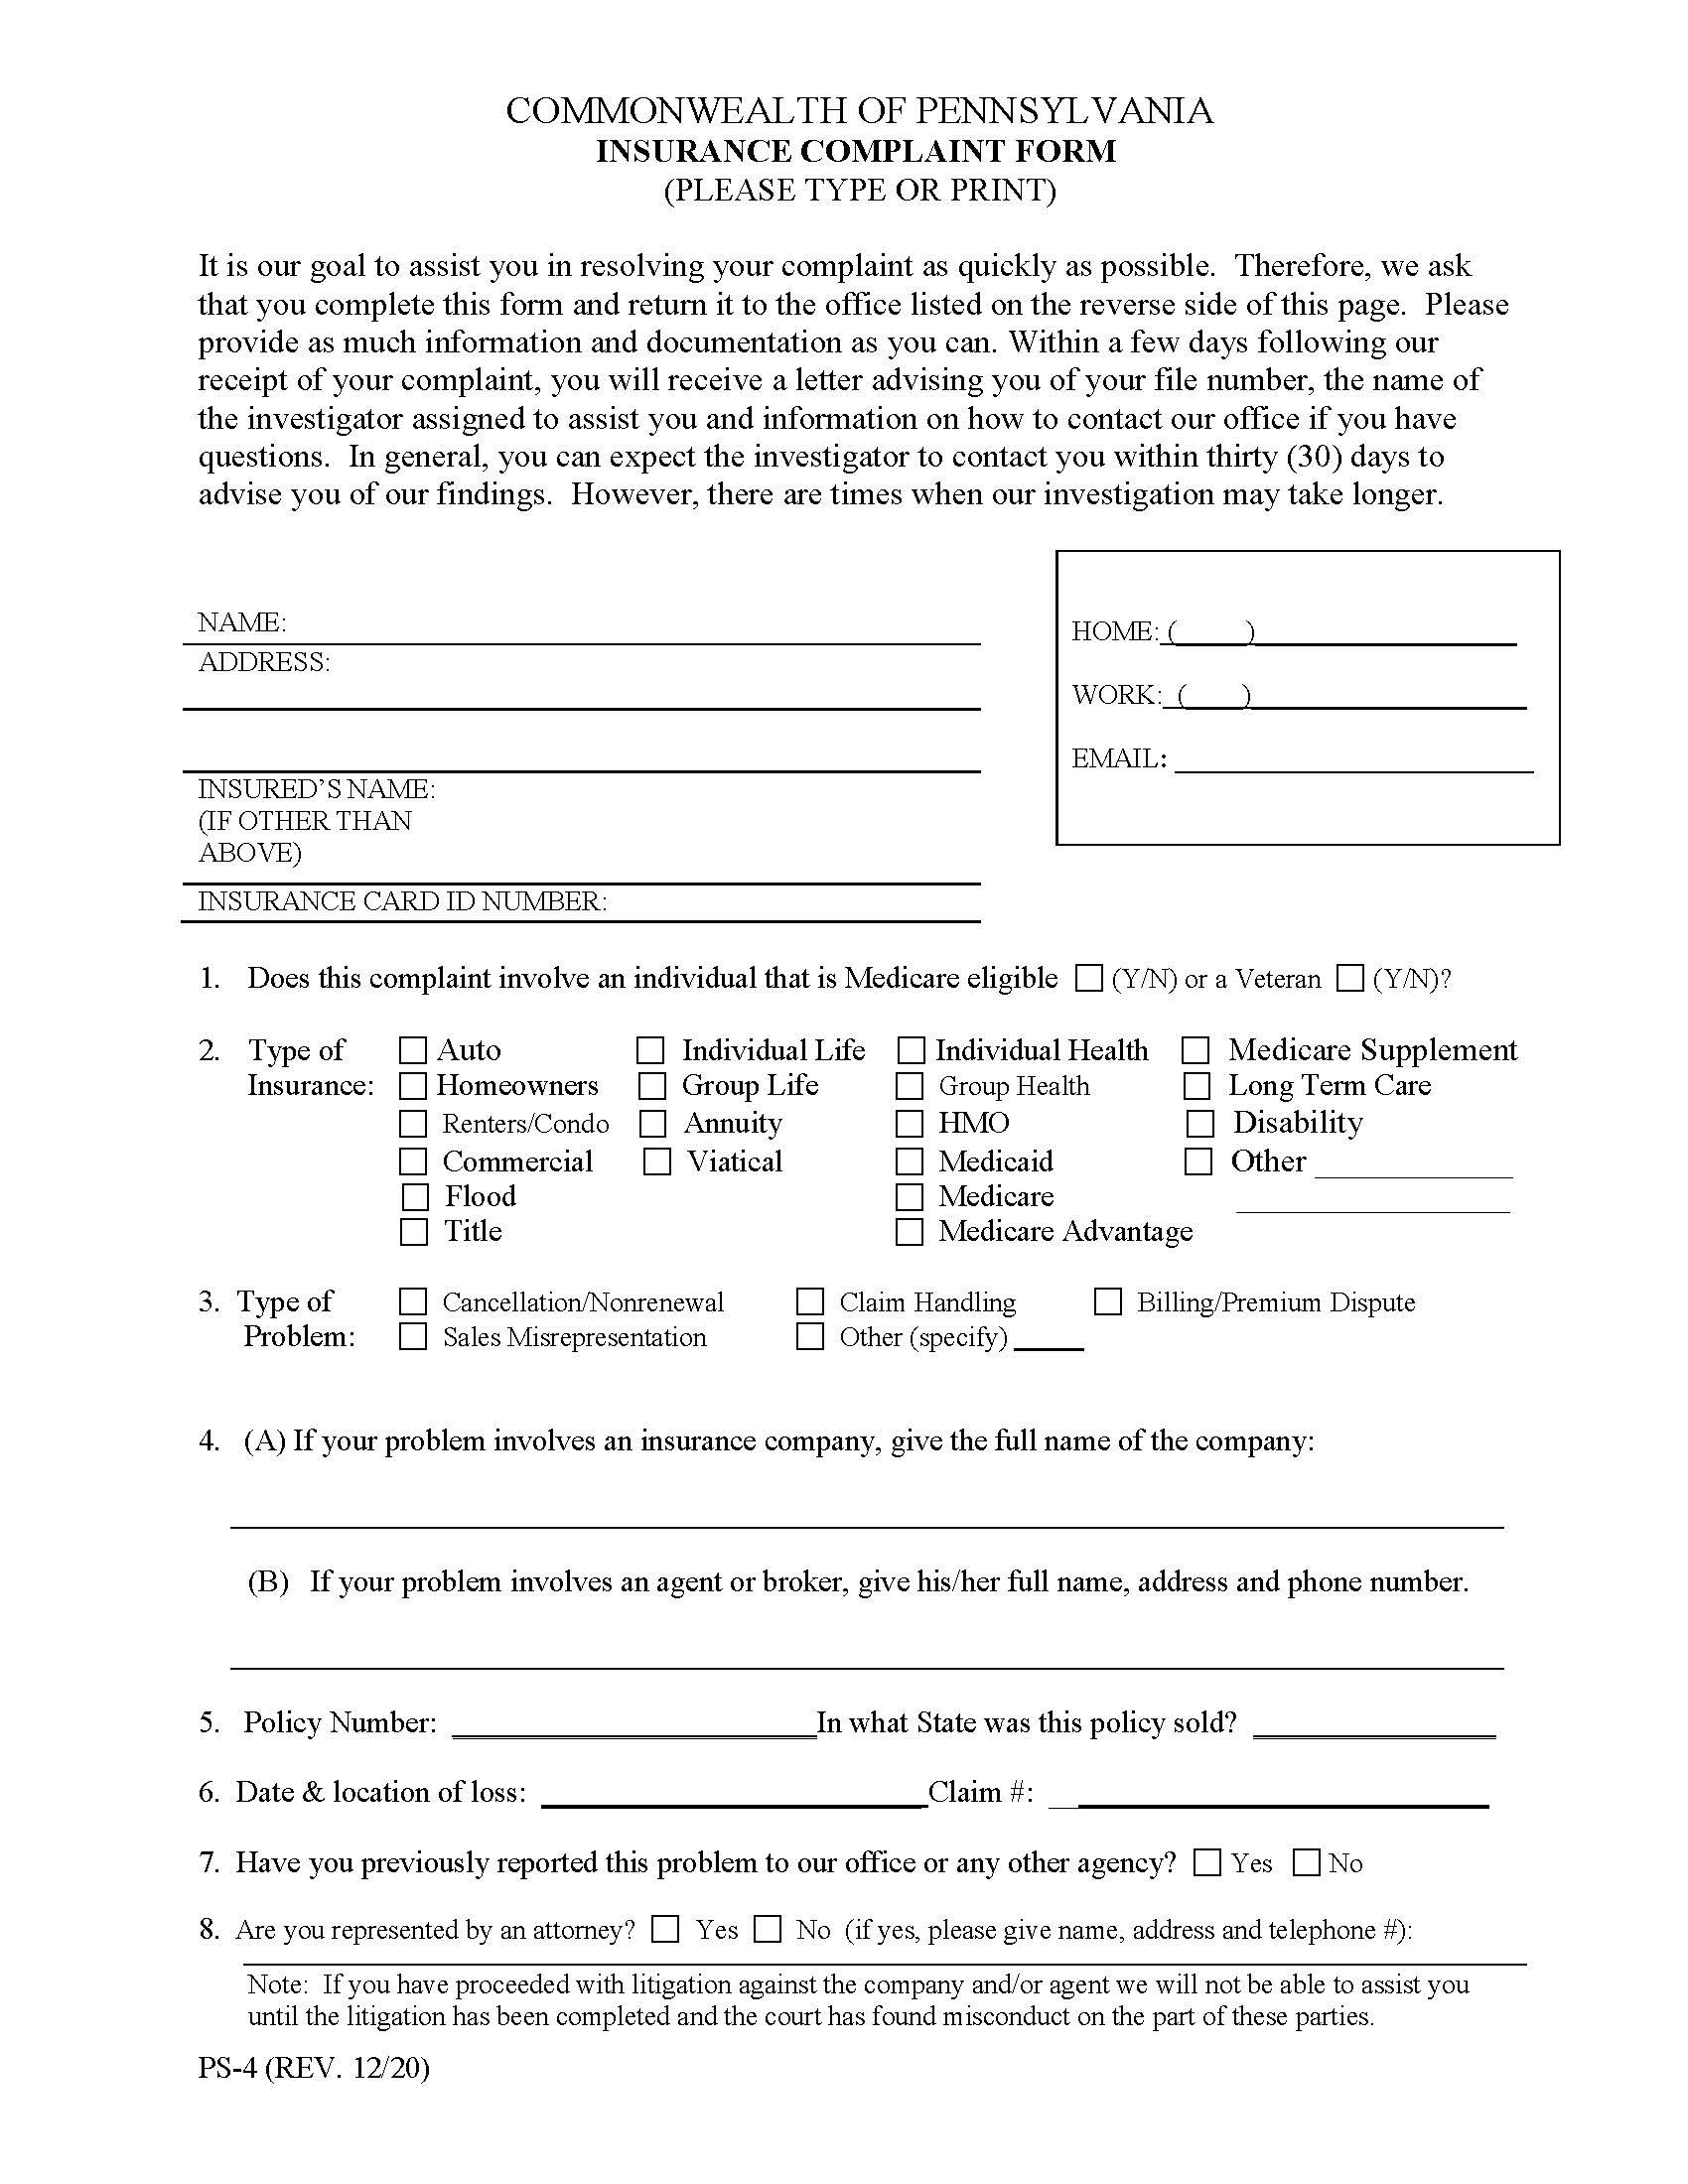 2023-PA Dept of Insurance Complaint Form_Page_1.jpg